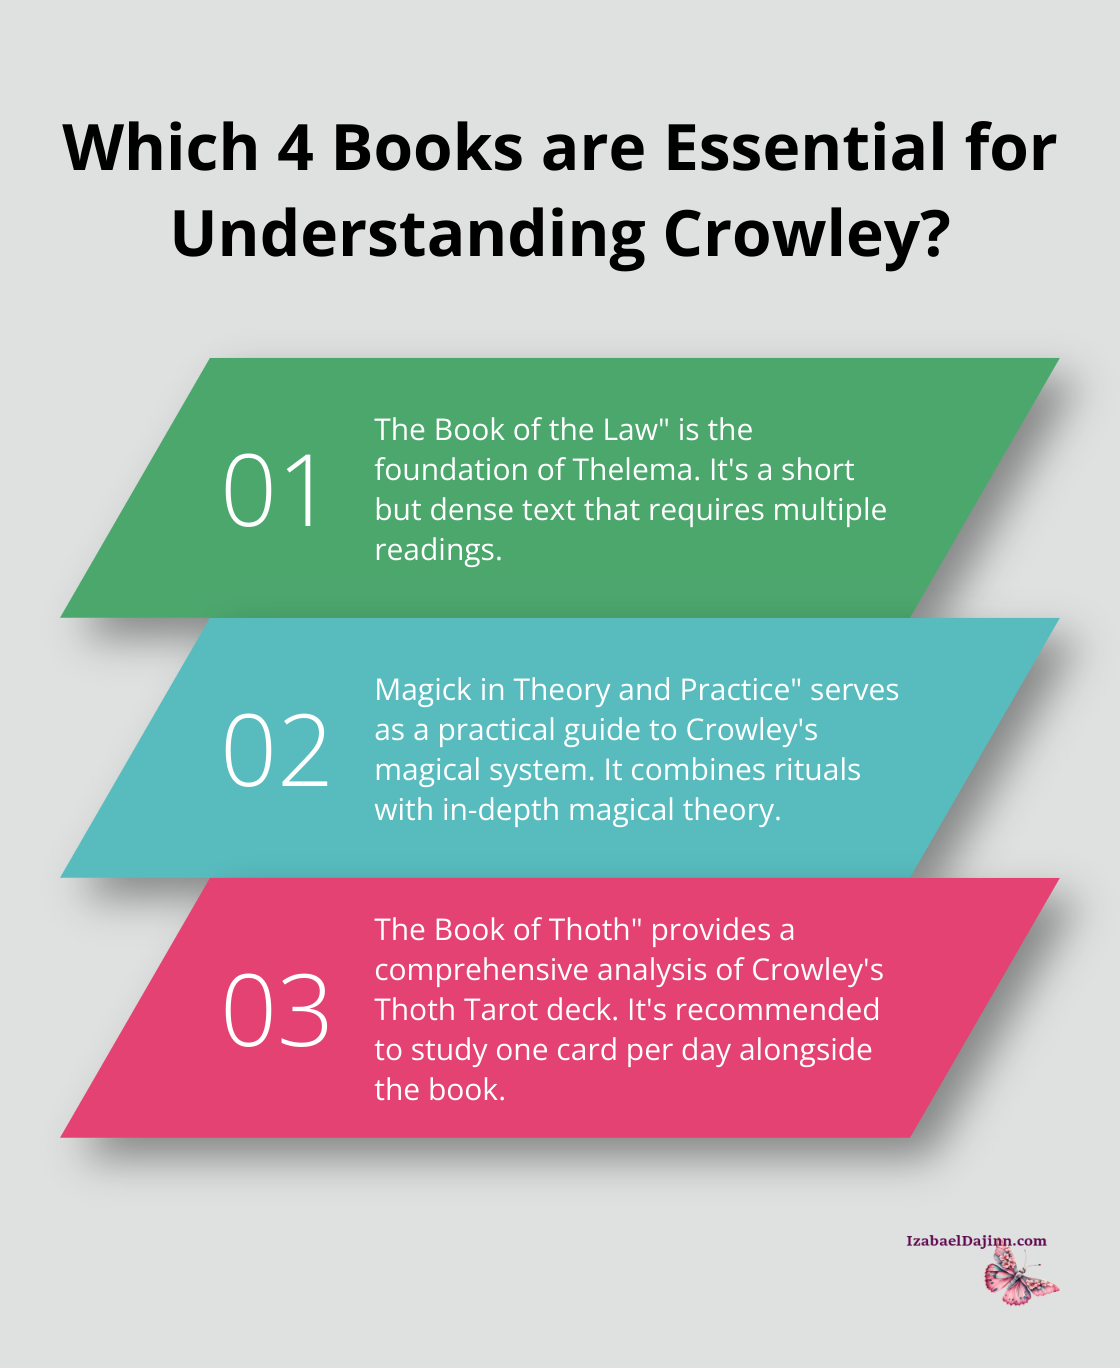 Fact - Which 4 Books are Essential for Understanding Crowley?